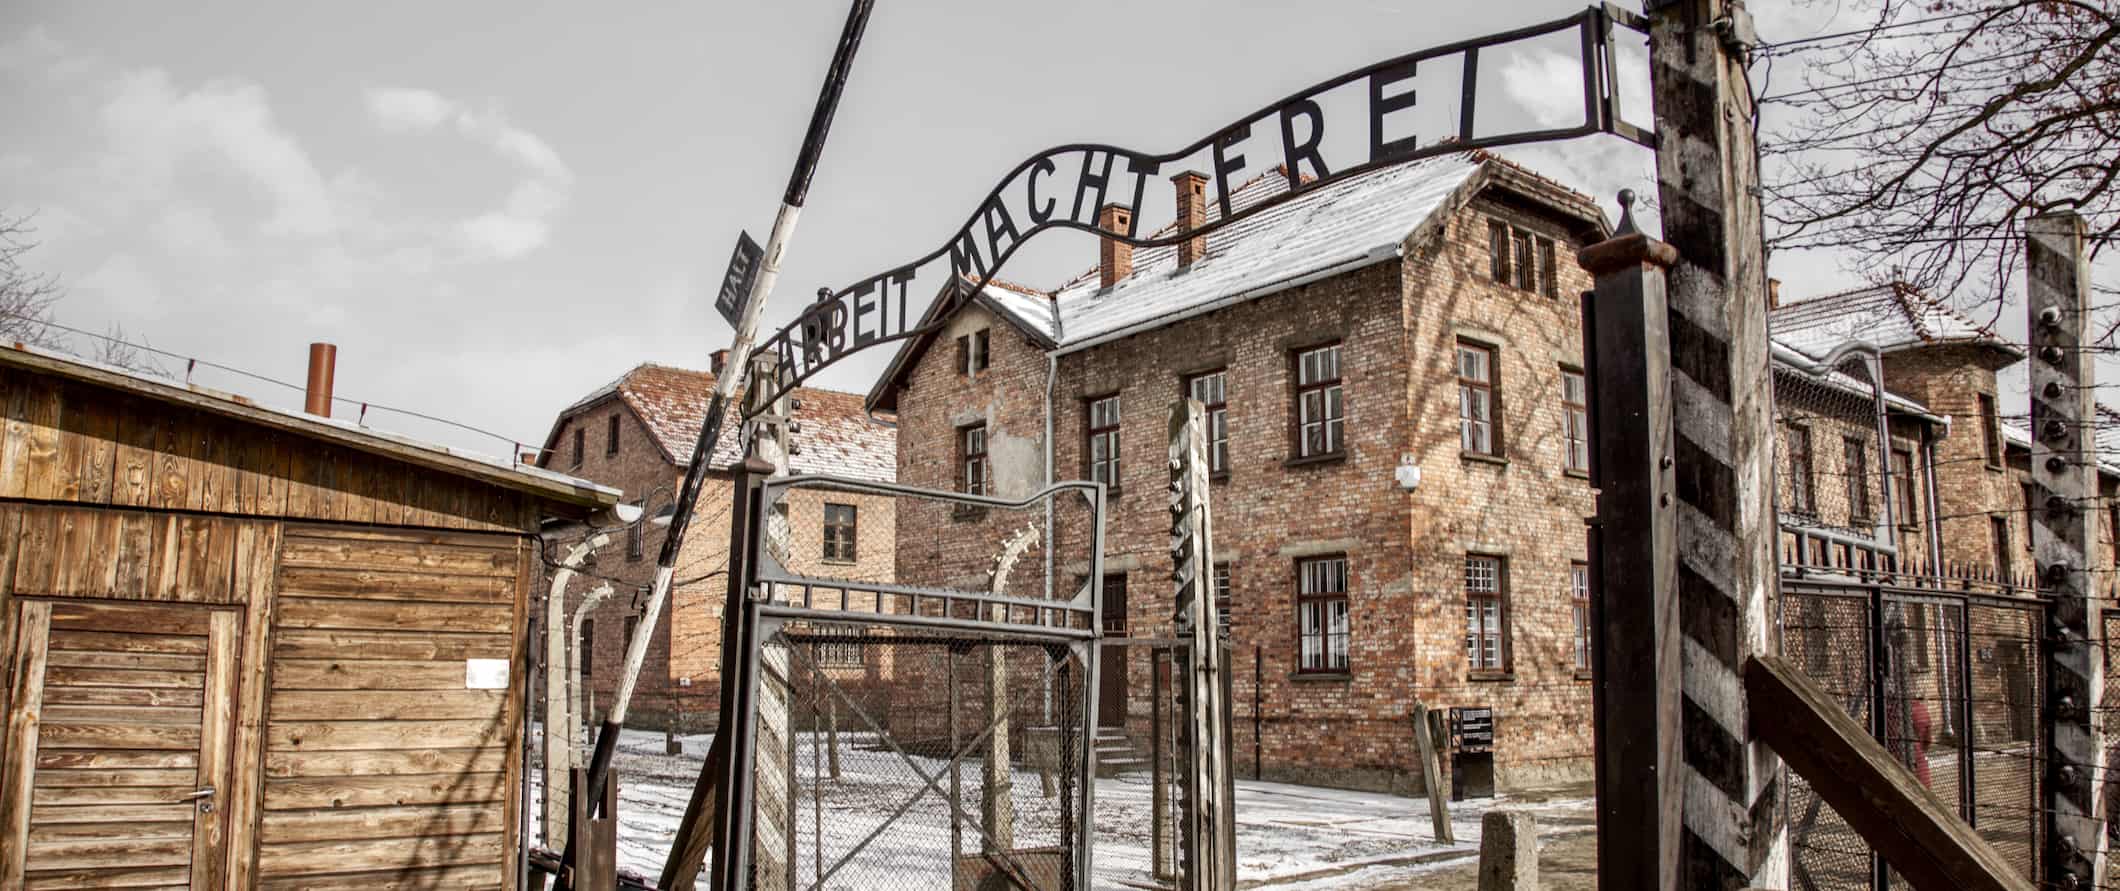 The gates of the Auschwitz concentration camp near Krakow, Poland